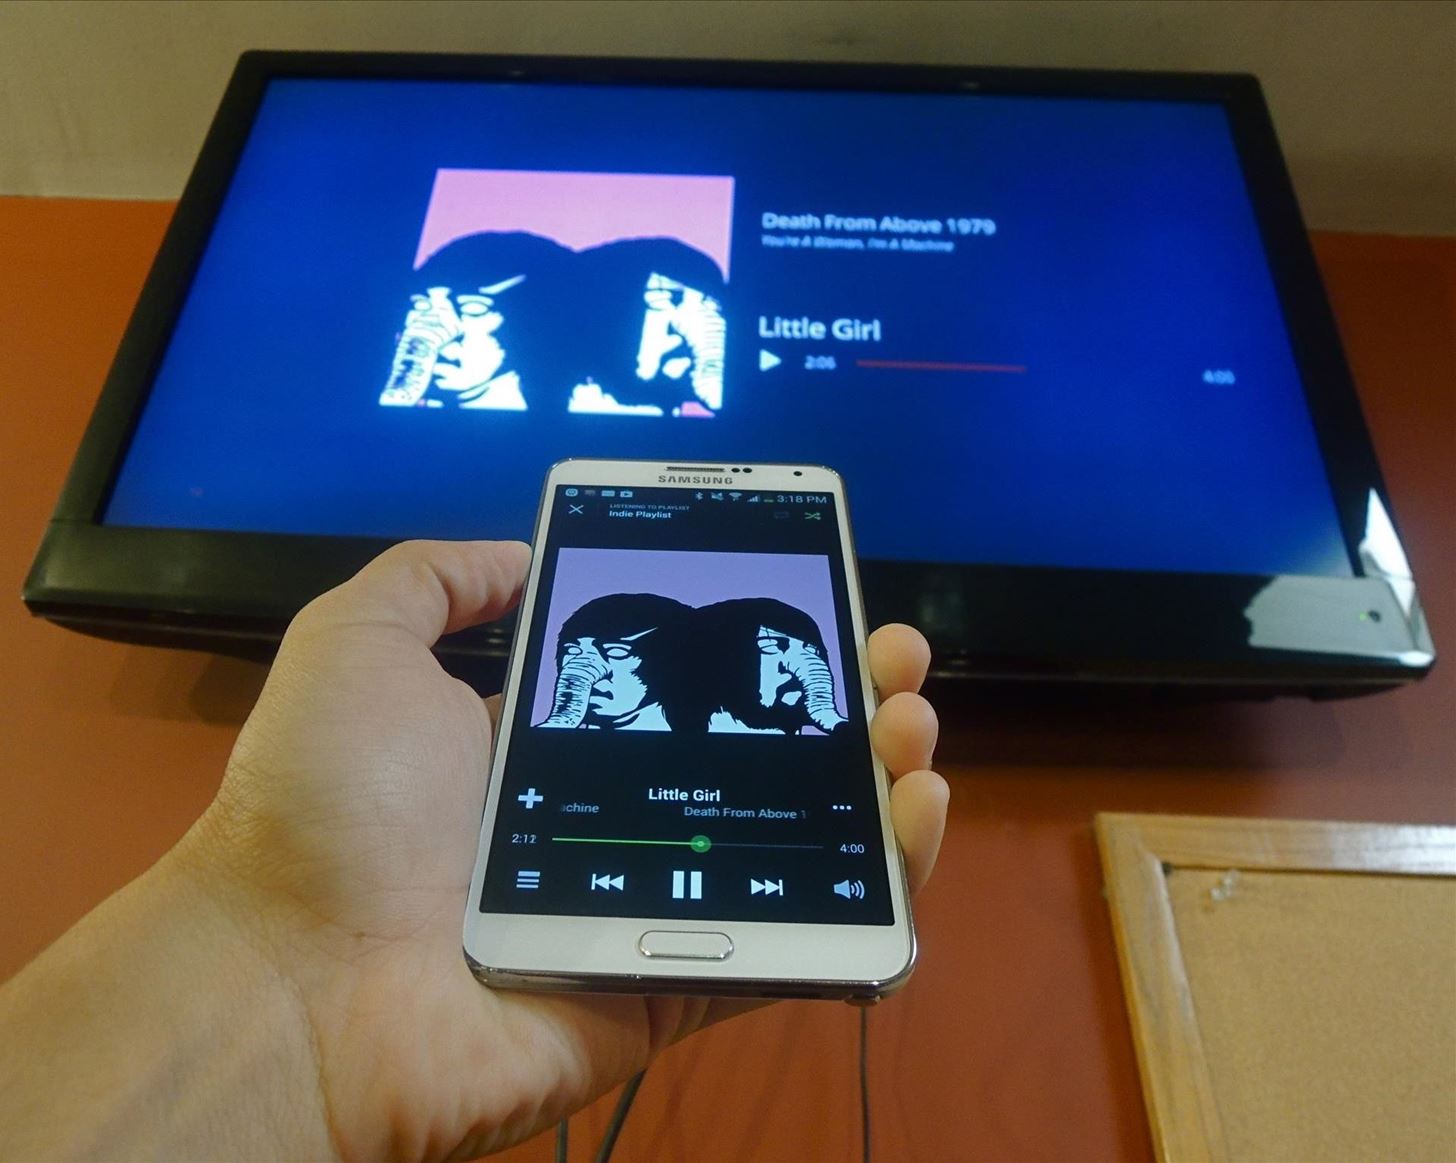 Spotify's Connection Issue With Chromecast